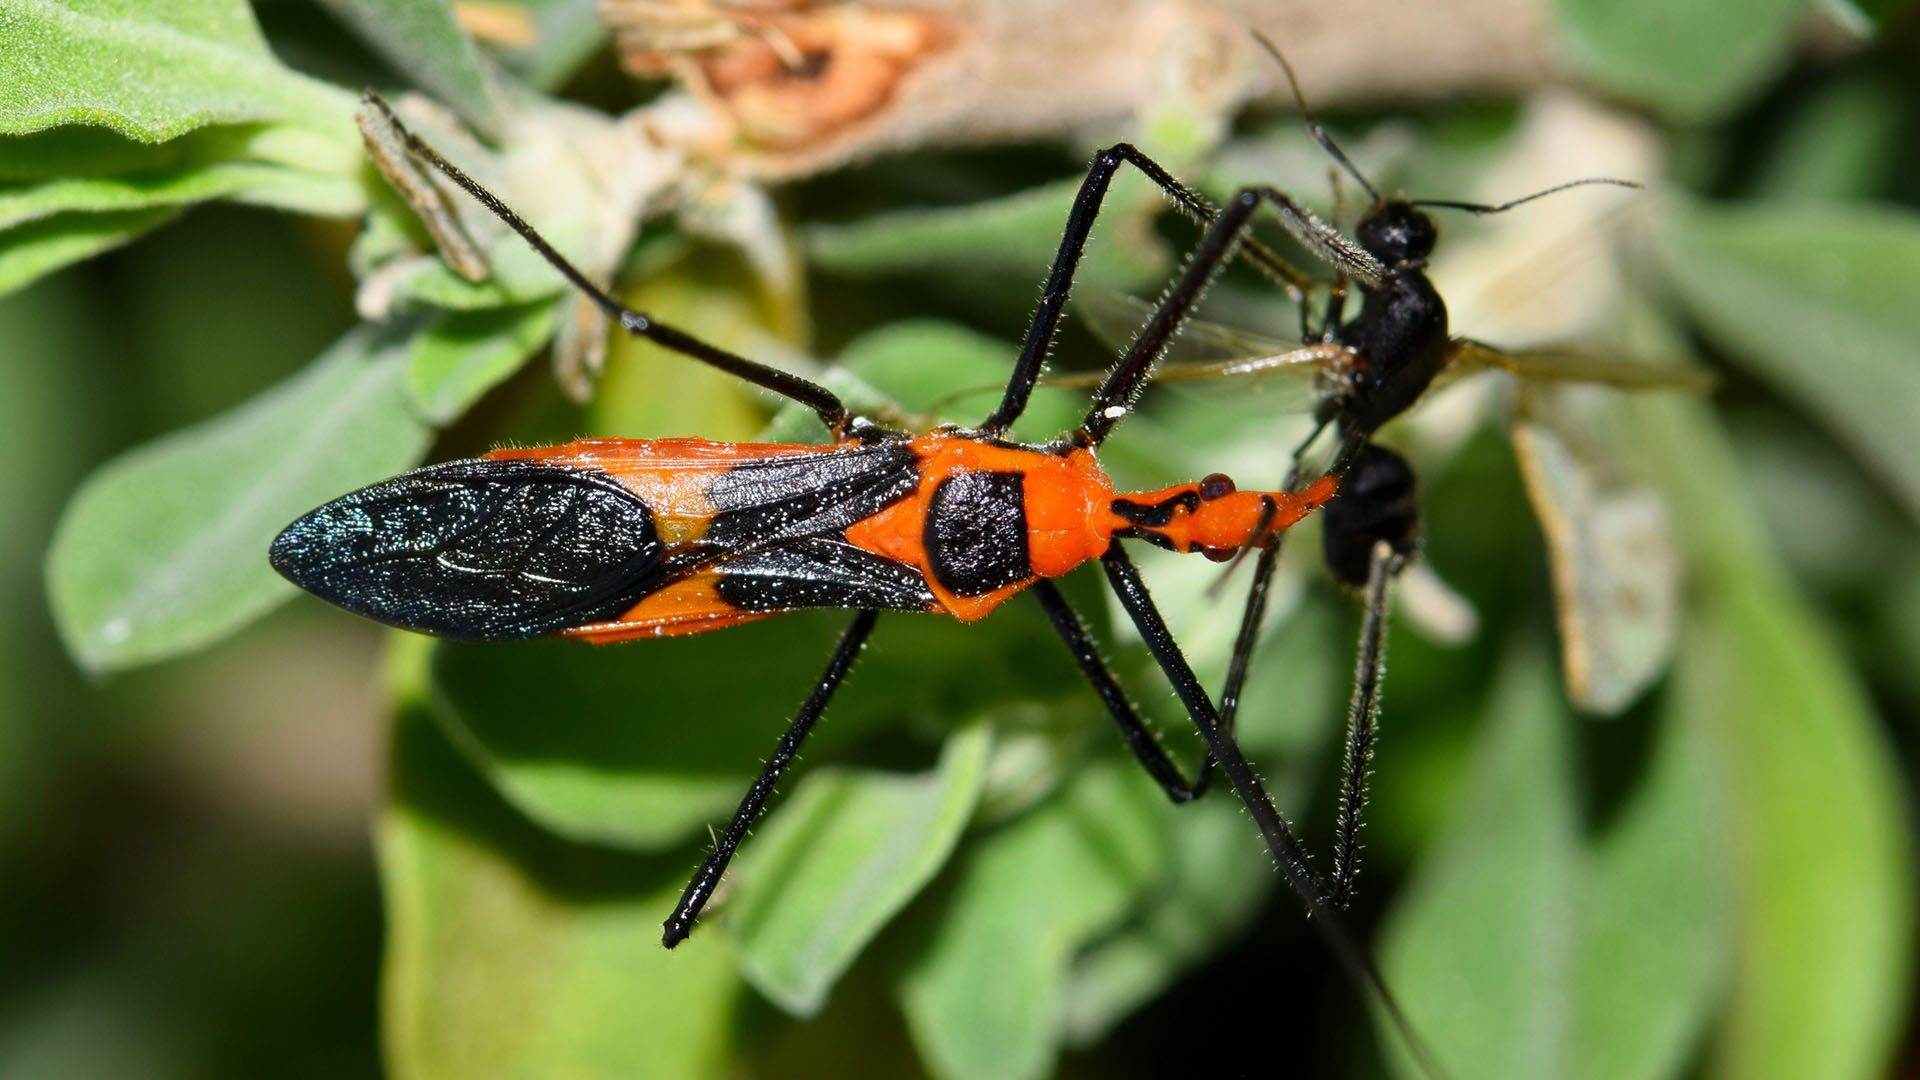 Scientists discover Rare Tool-Using Trait in Assassin Bugs